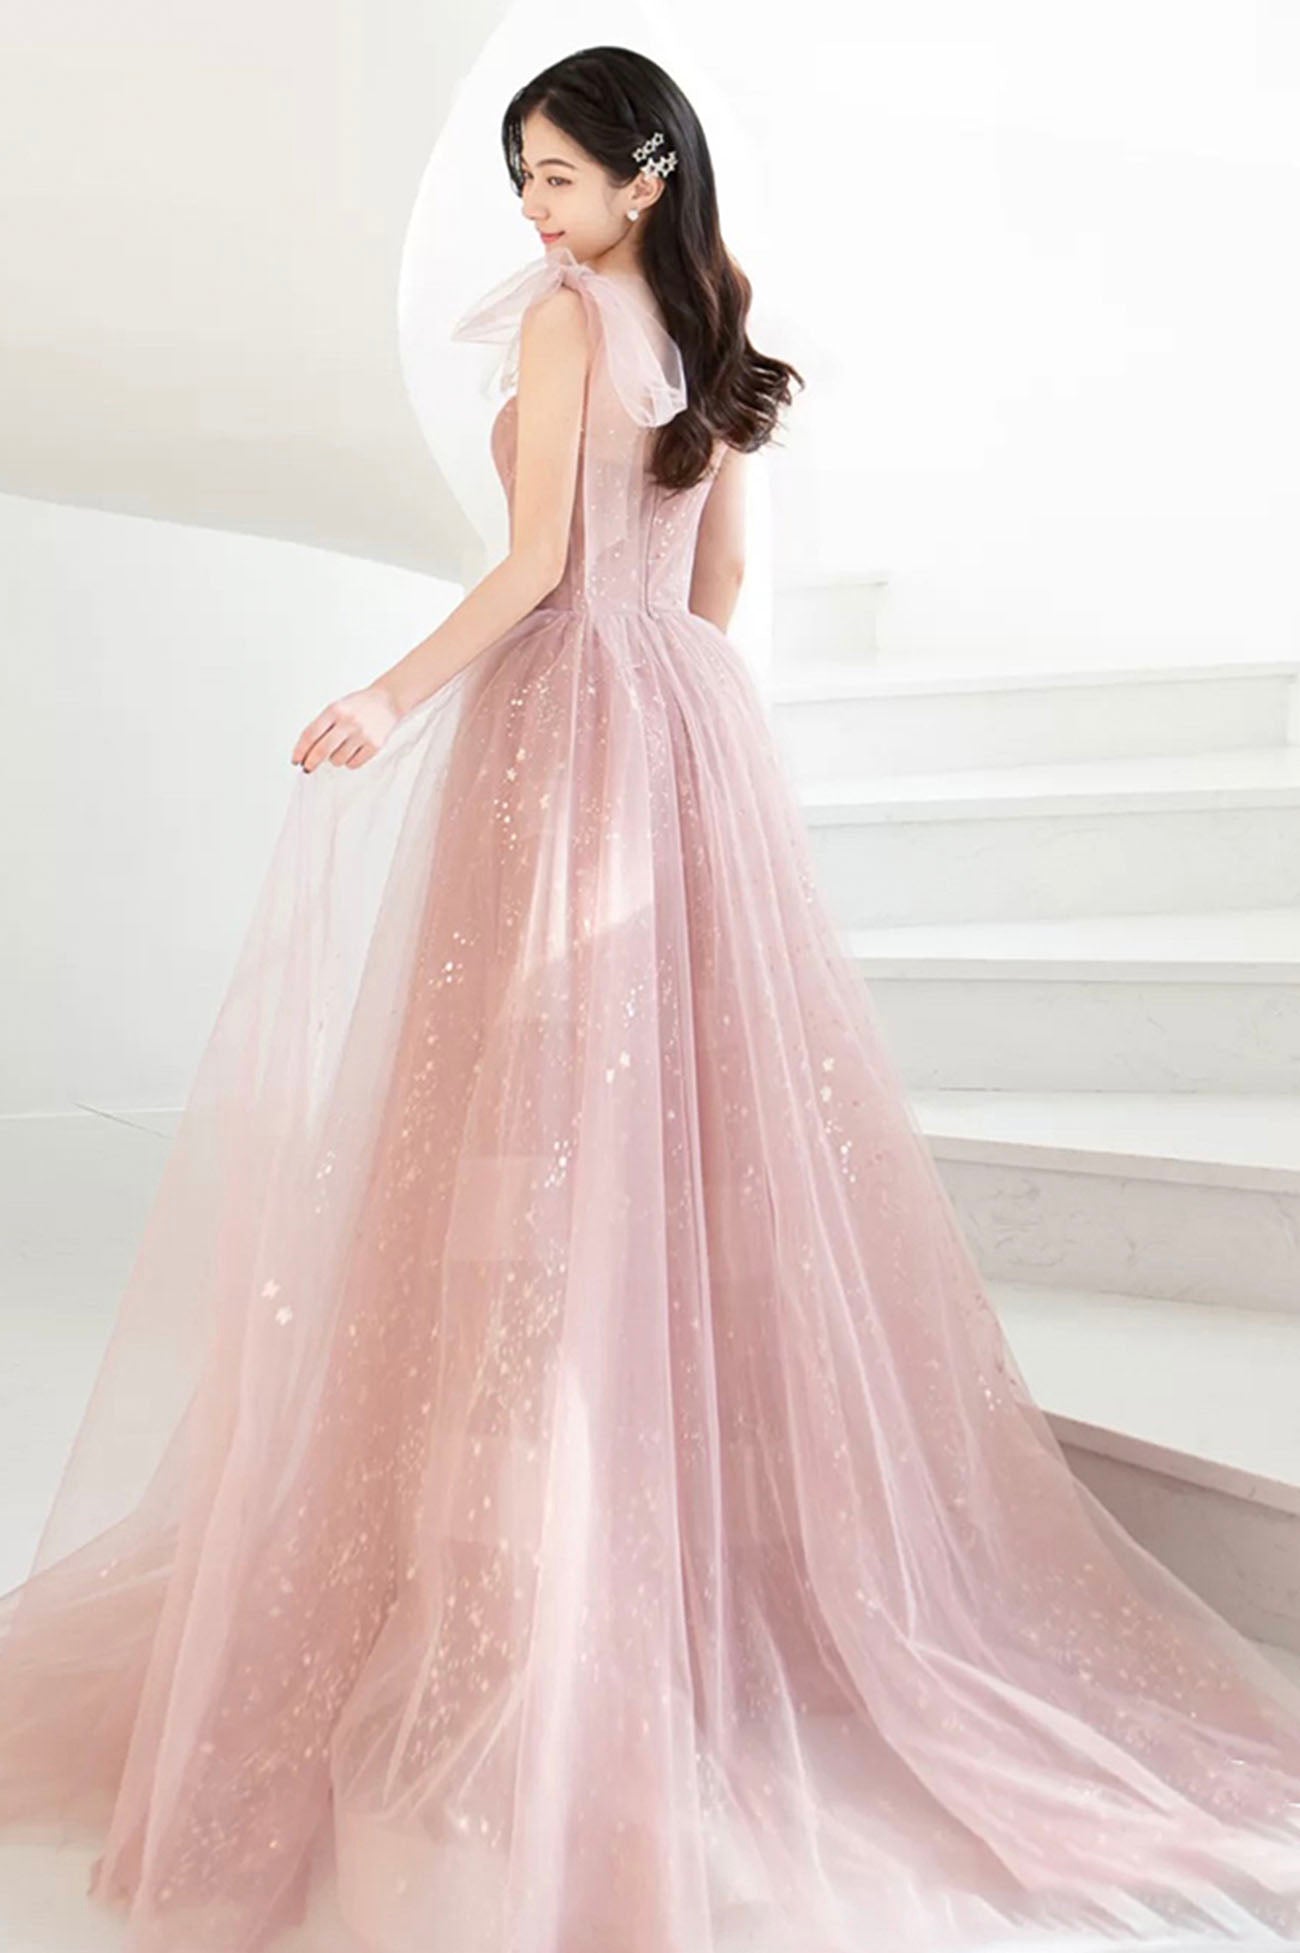 Pink Tulle Long Prom Dress, Beautiful A-Line Evening Dress